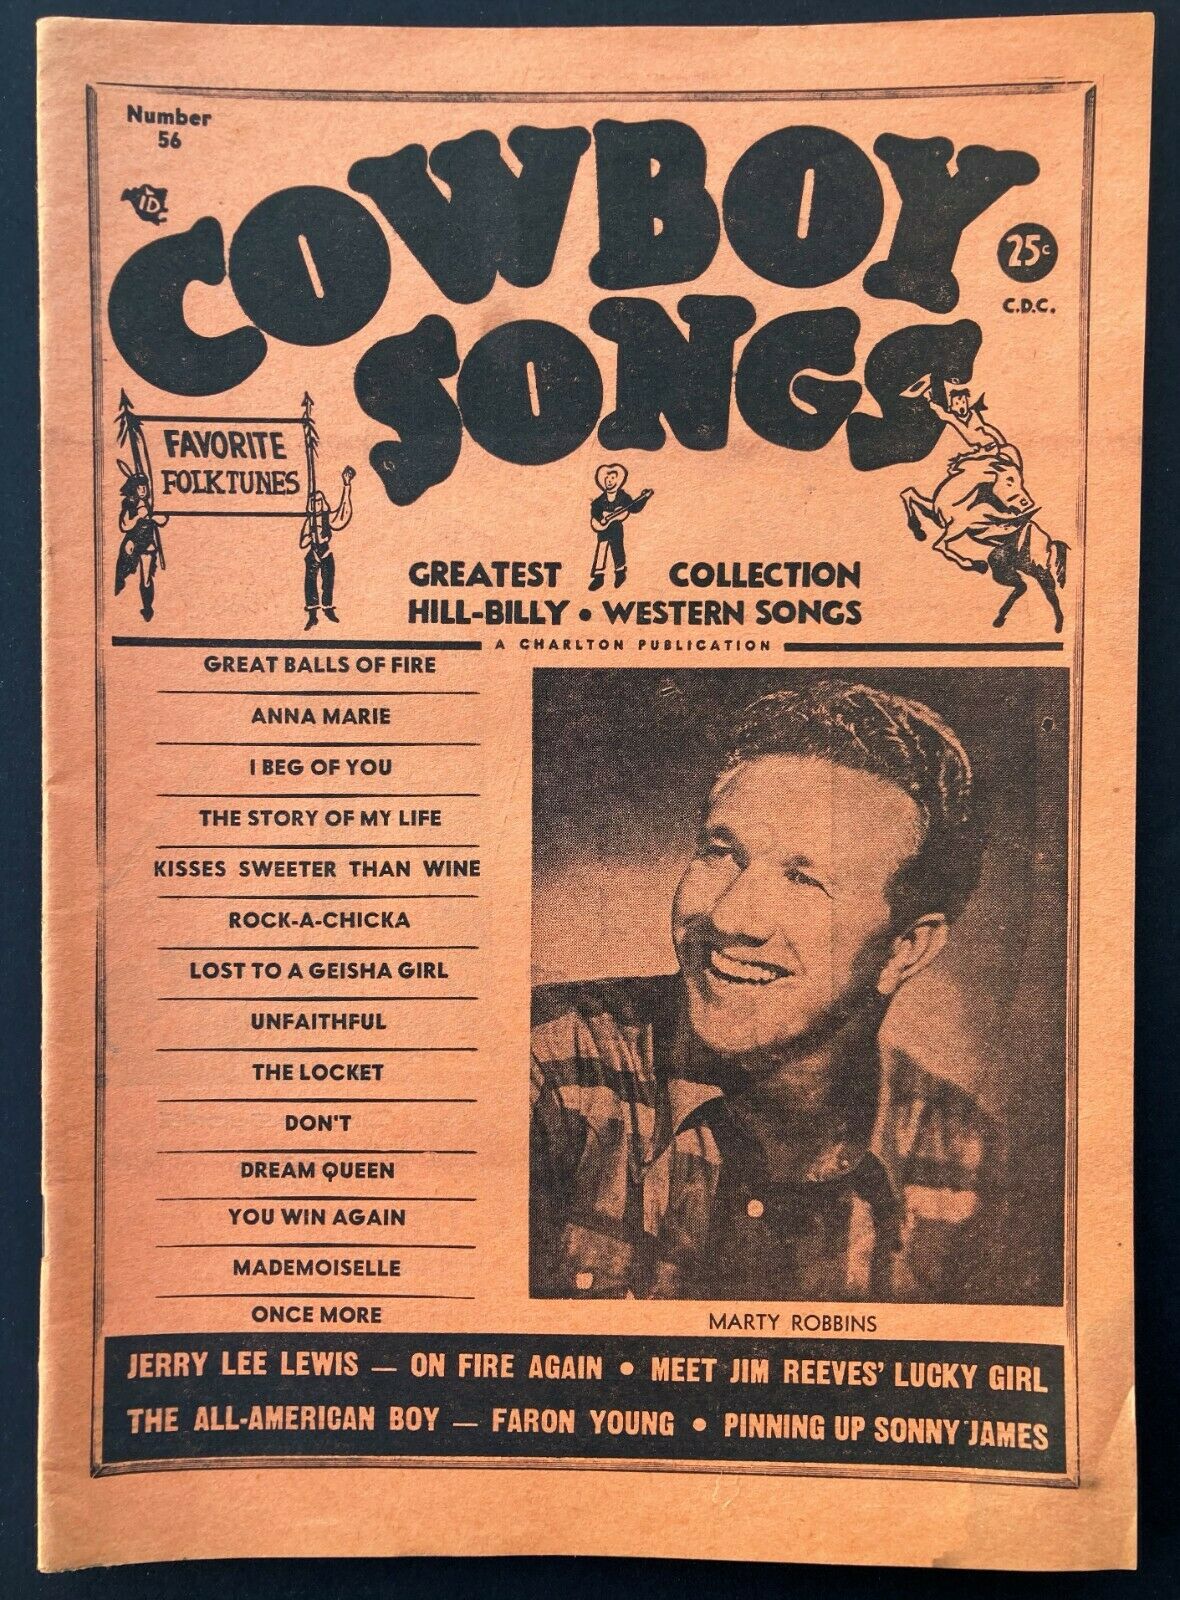 1958 Jerry Lee Lewis "cowboy Songs" #56 Country Music Magazine - Marty Robbins